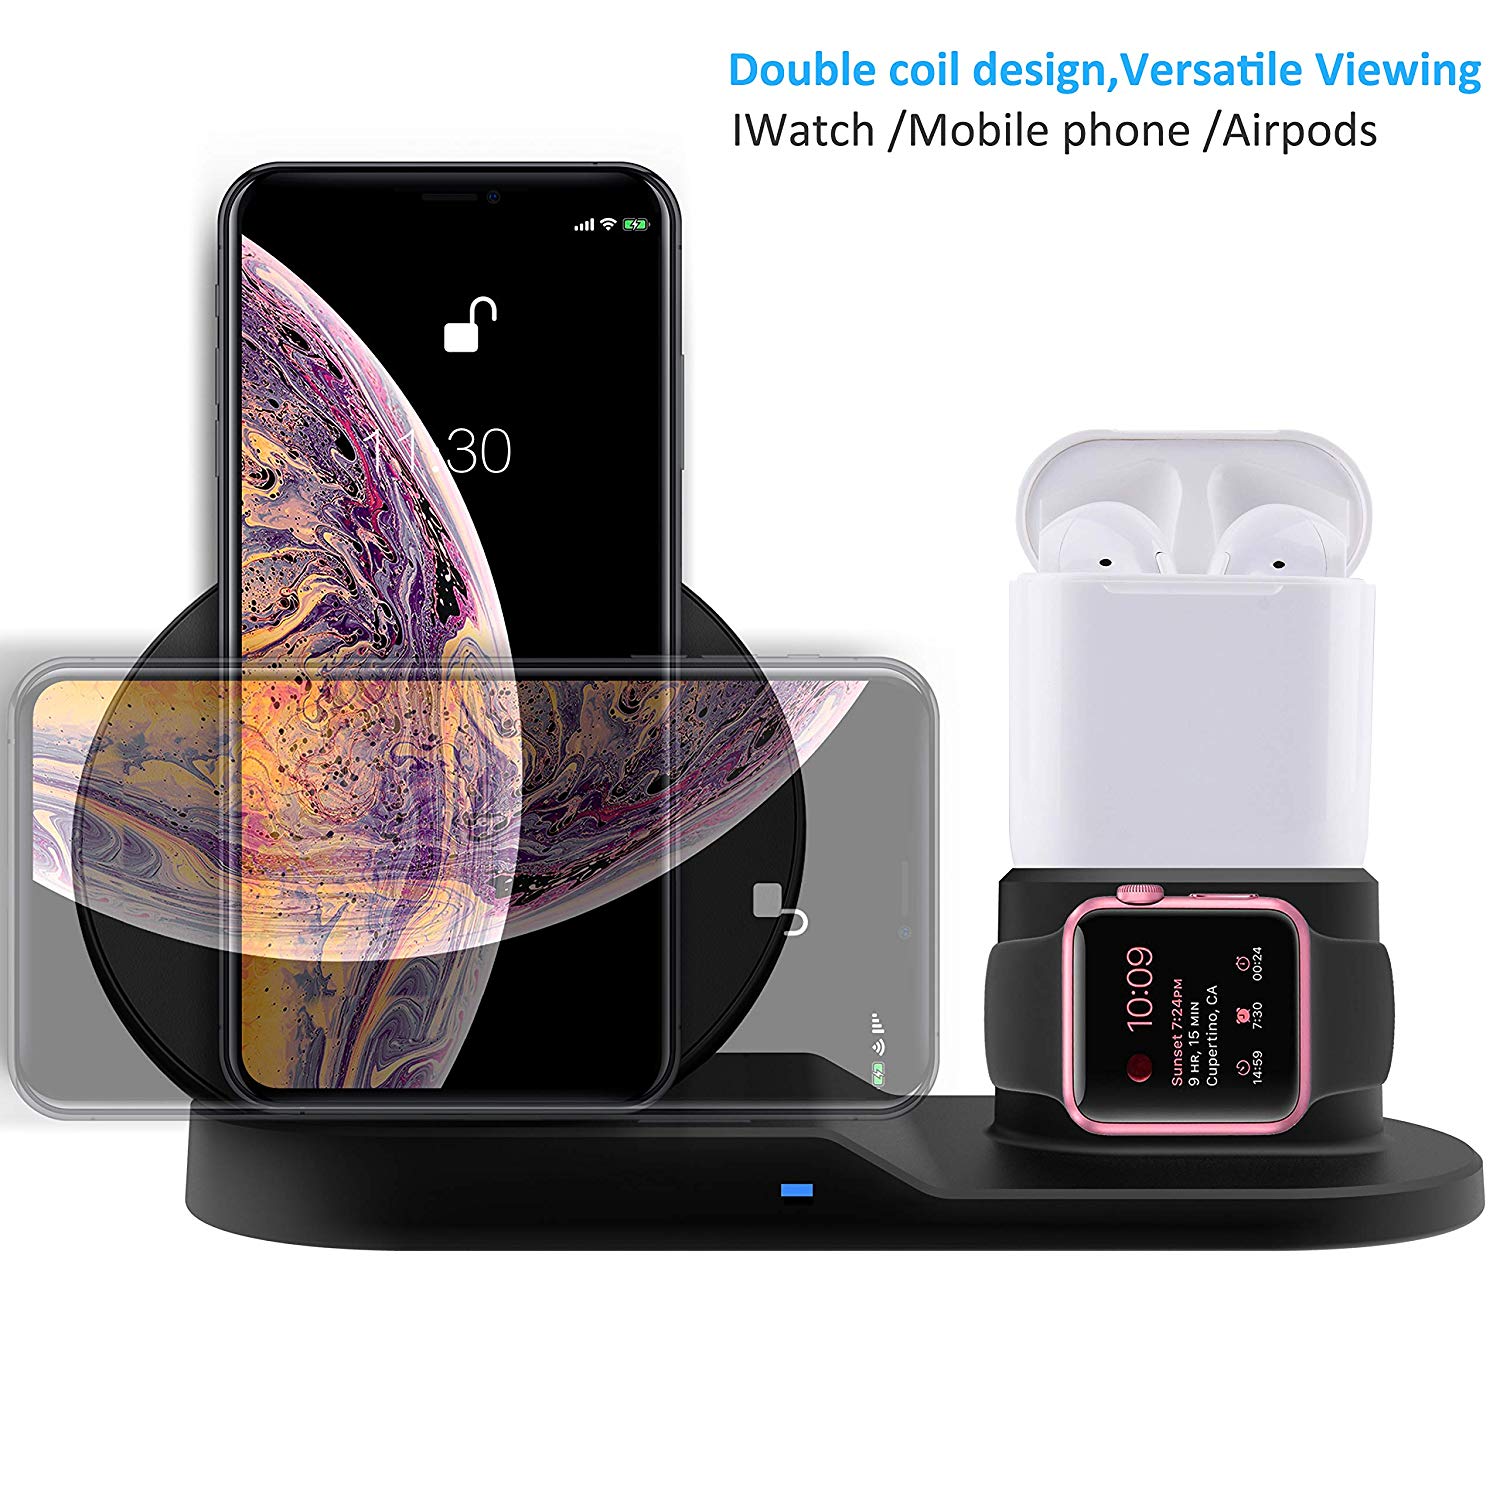 Wireless Charging Stand for Apple Watch Series 3/2/1, Charging stand for AirPods,3 in1 wireless charger stand for iPhone Xs/XS MAX/XR/X/8/8 Plus,Sumsung and all other QI-Enable Devices - image 1 of 8